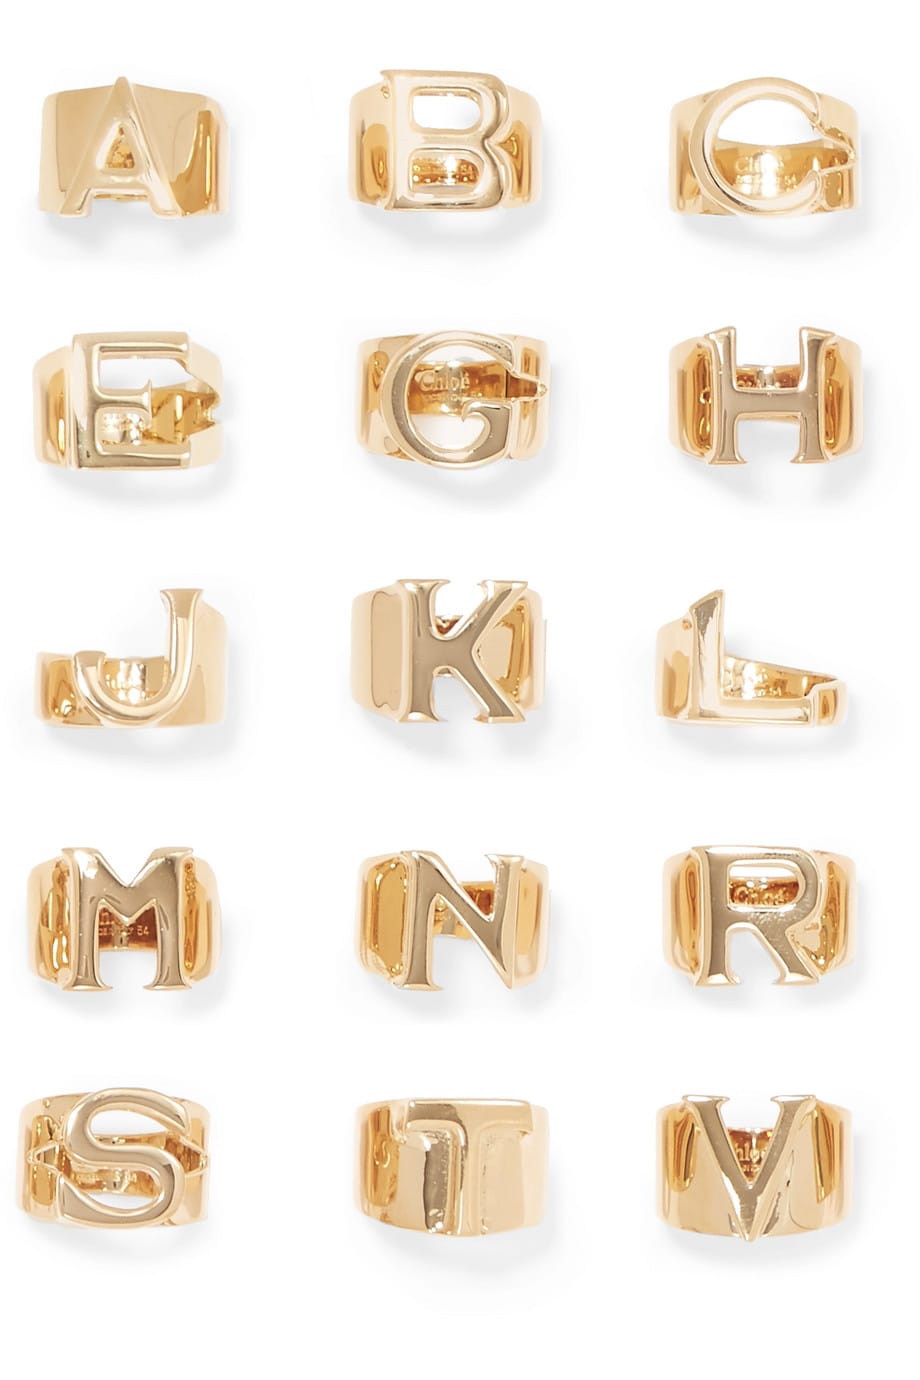 Gold Initial Letter Rings For Women Girls ,Open Letter Ring , Stackable Alphabet  Ring,Jewelry Gifts For For Mum Her Wife Girlfriend - Walmart.com